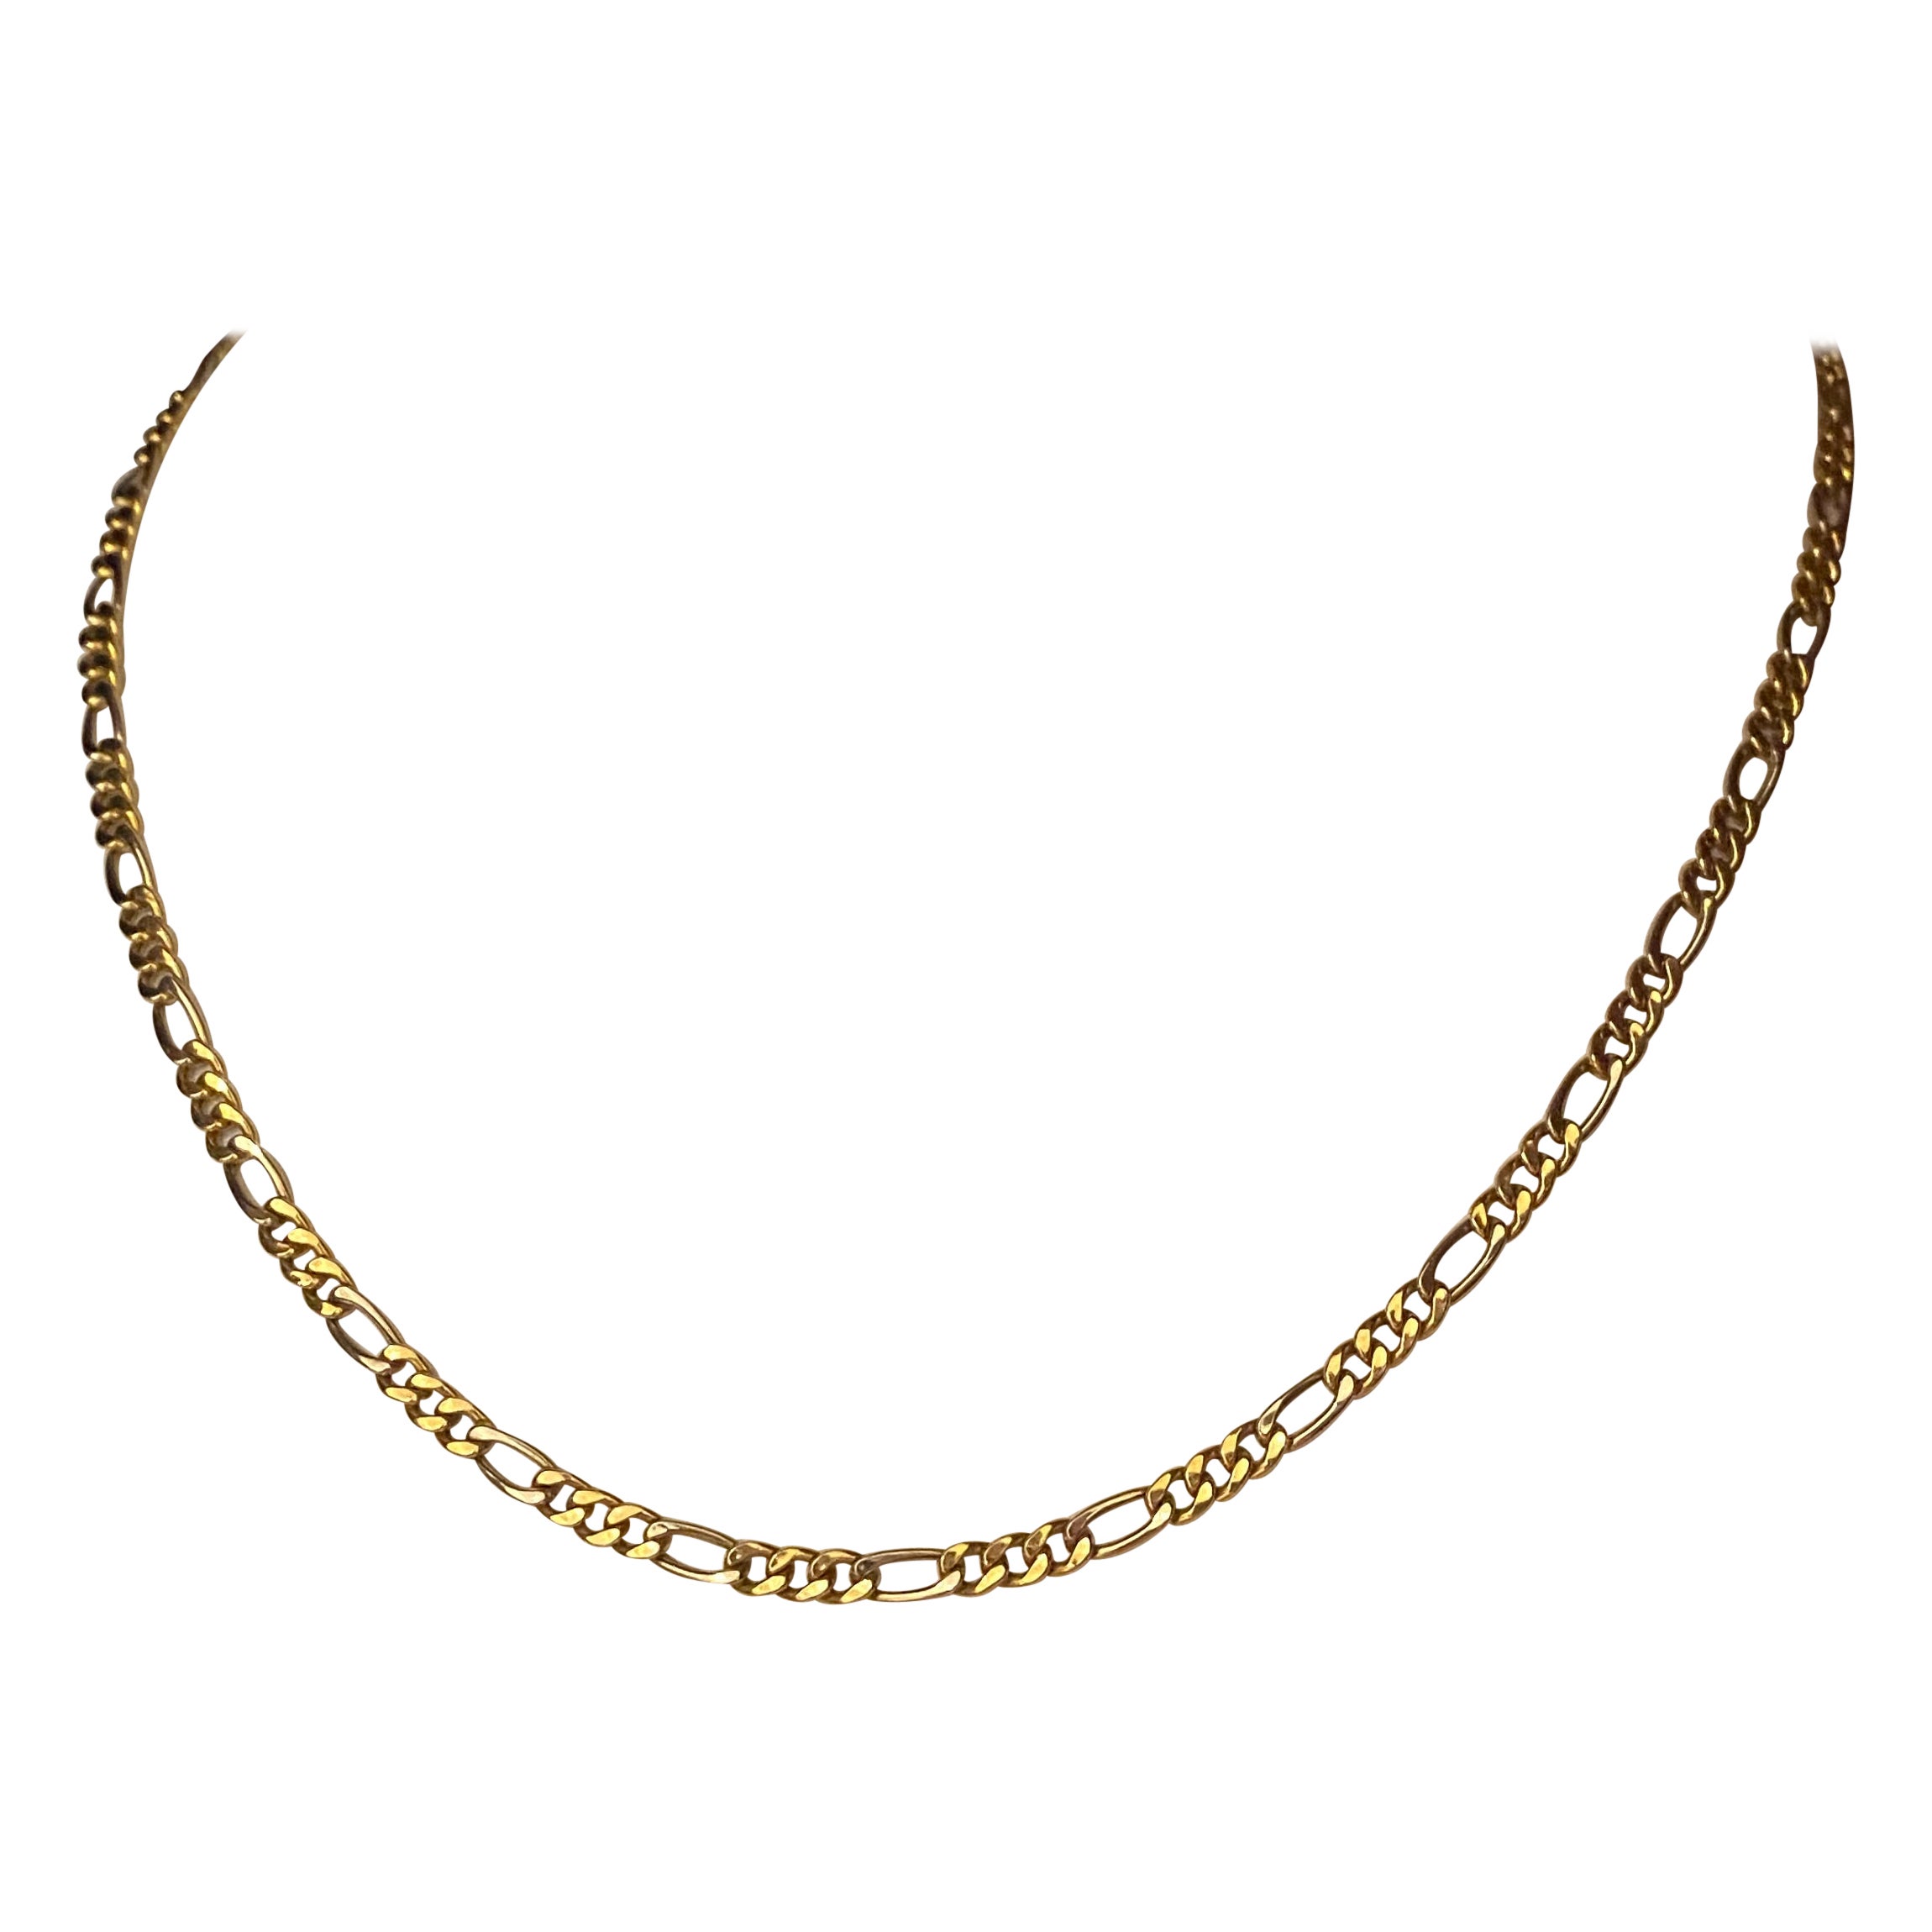 Two-Tone 18K 750 White & Yellow Gold Figaro Links Vintage Chain, 50.5cm, Italy. For Sale